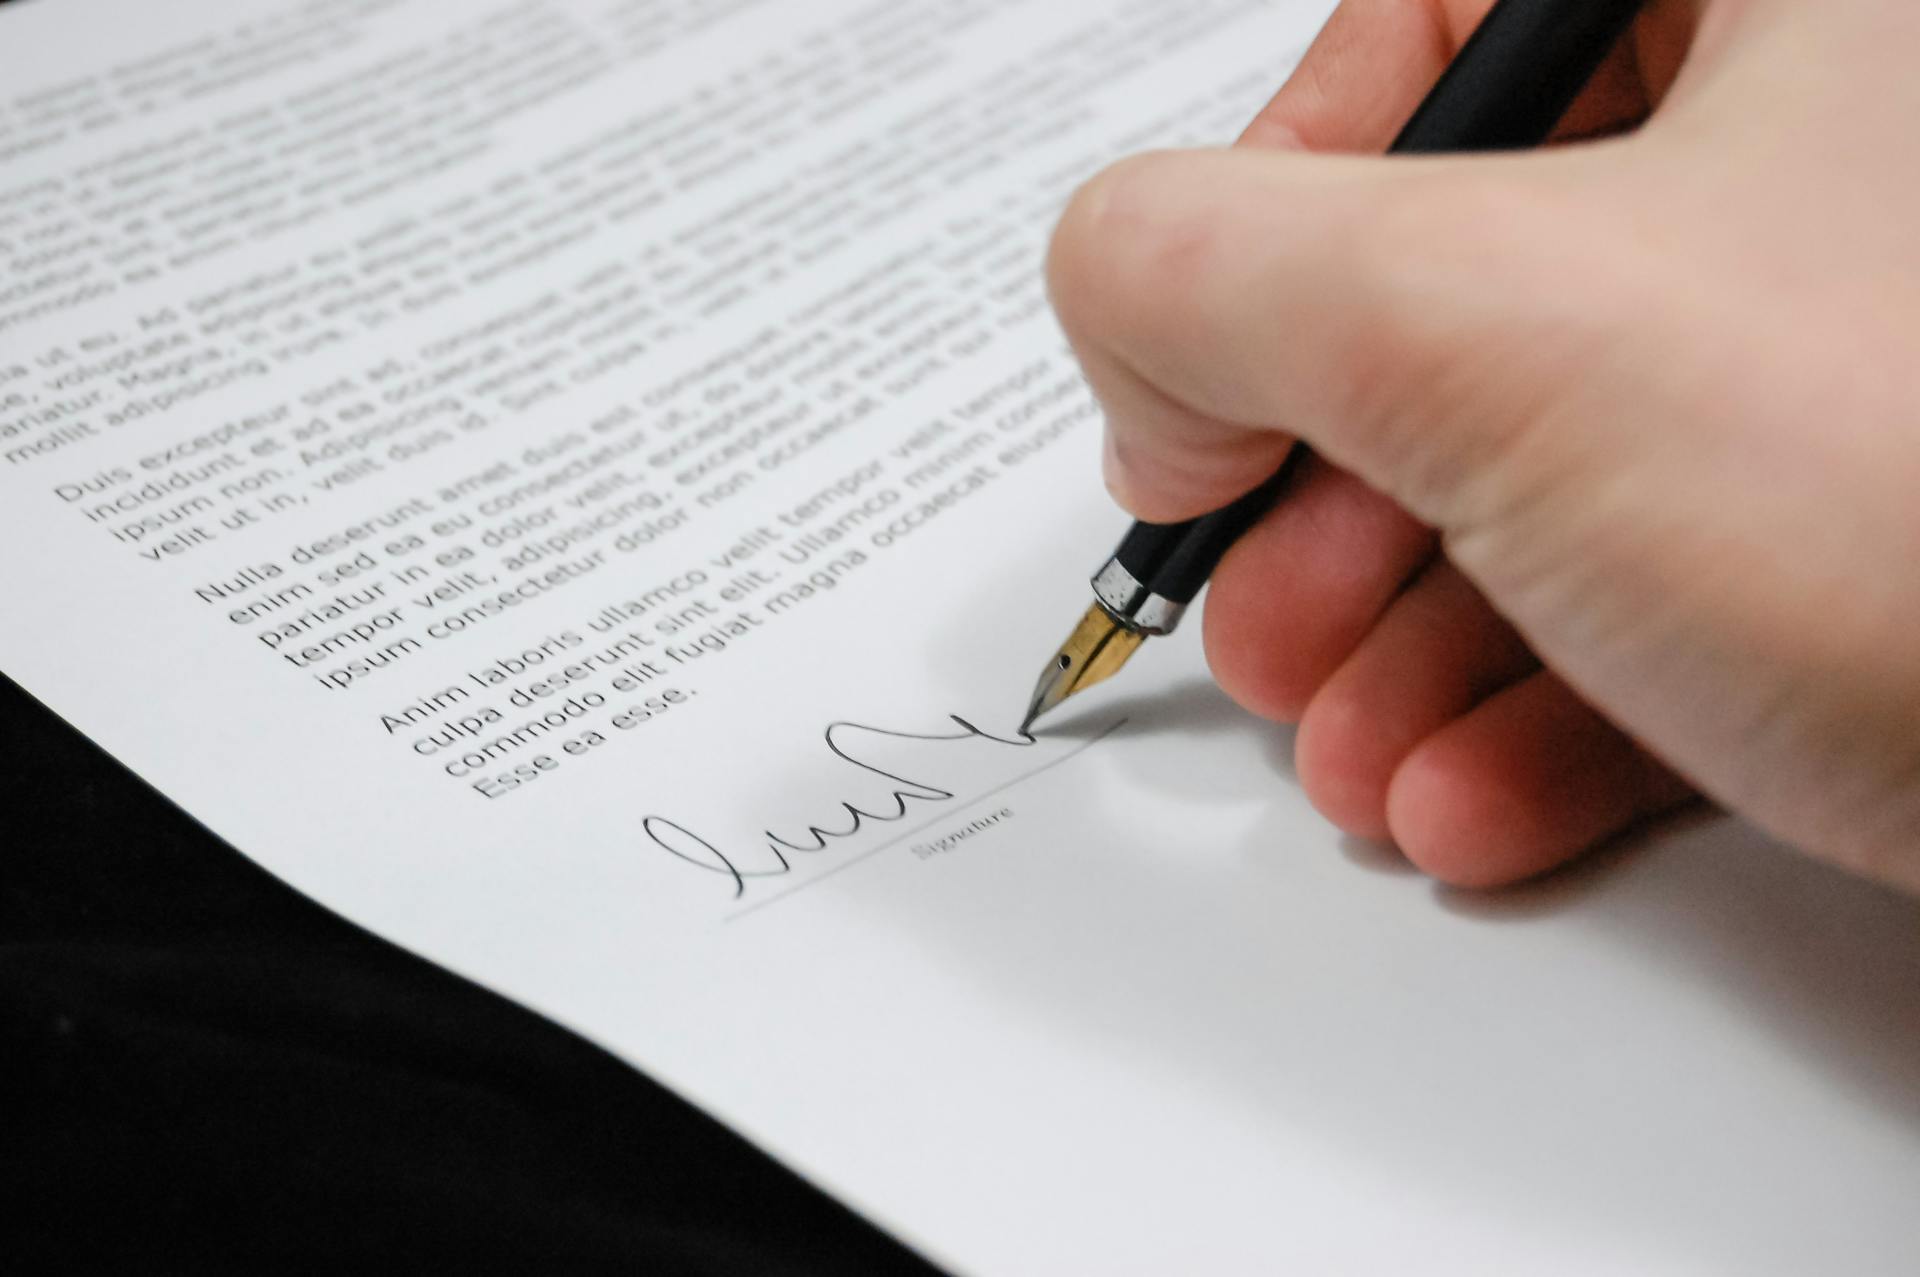 A person signing a legal document | Source: Pexels